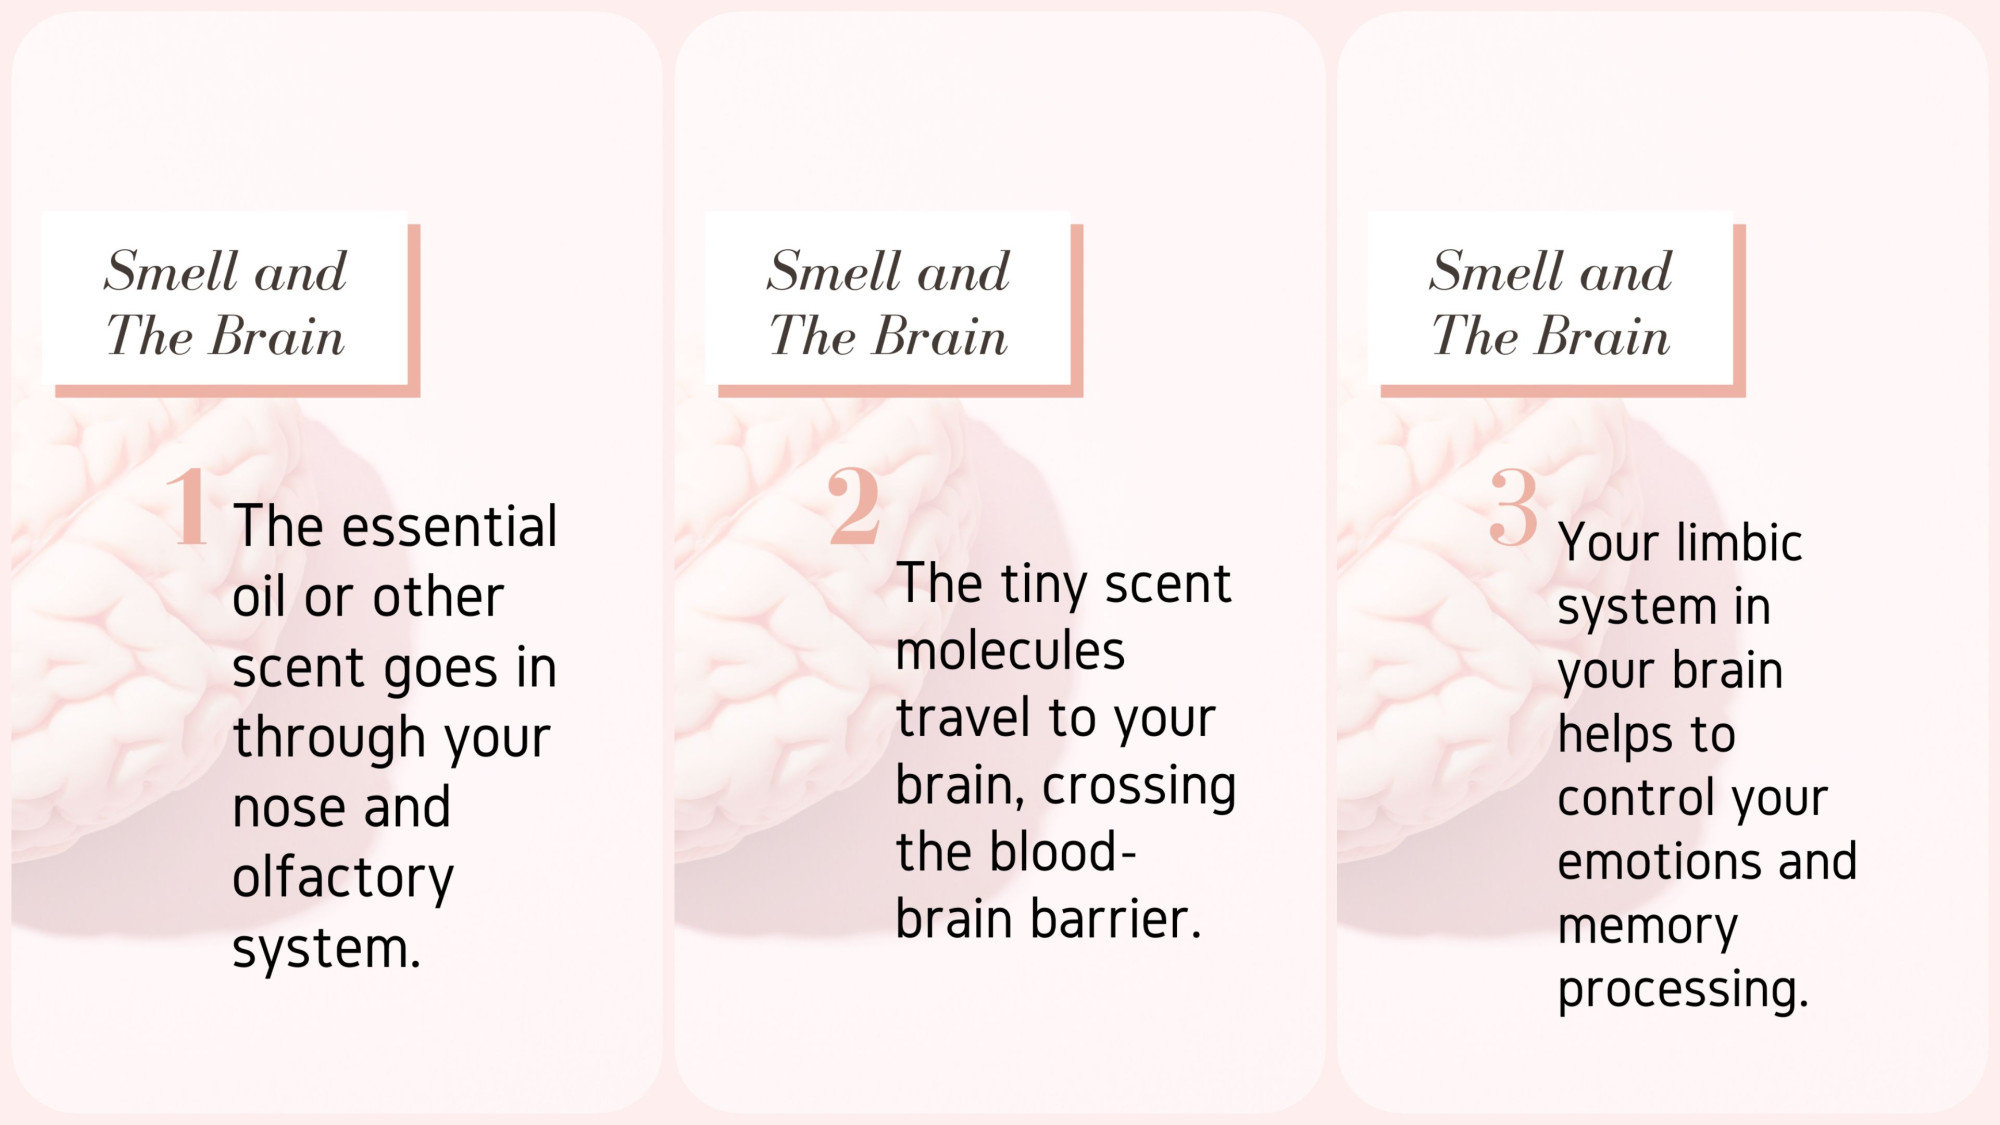 Smell and the Brain